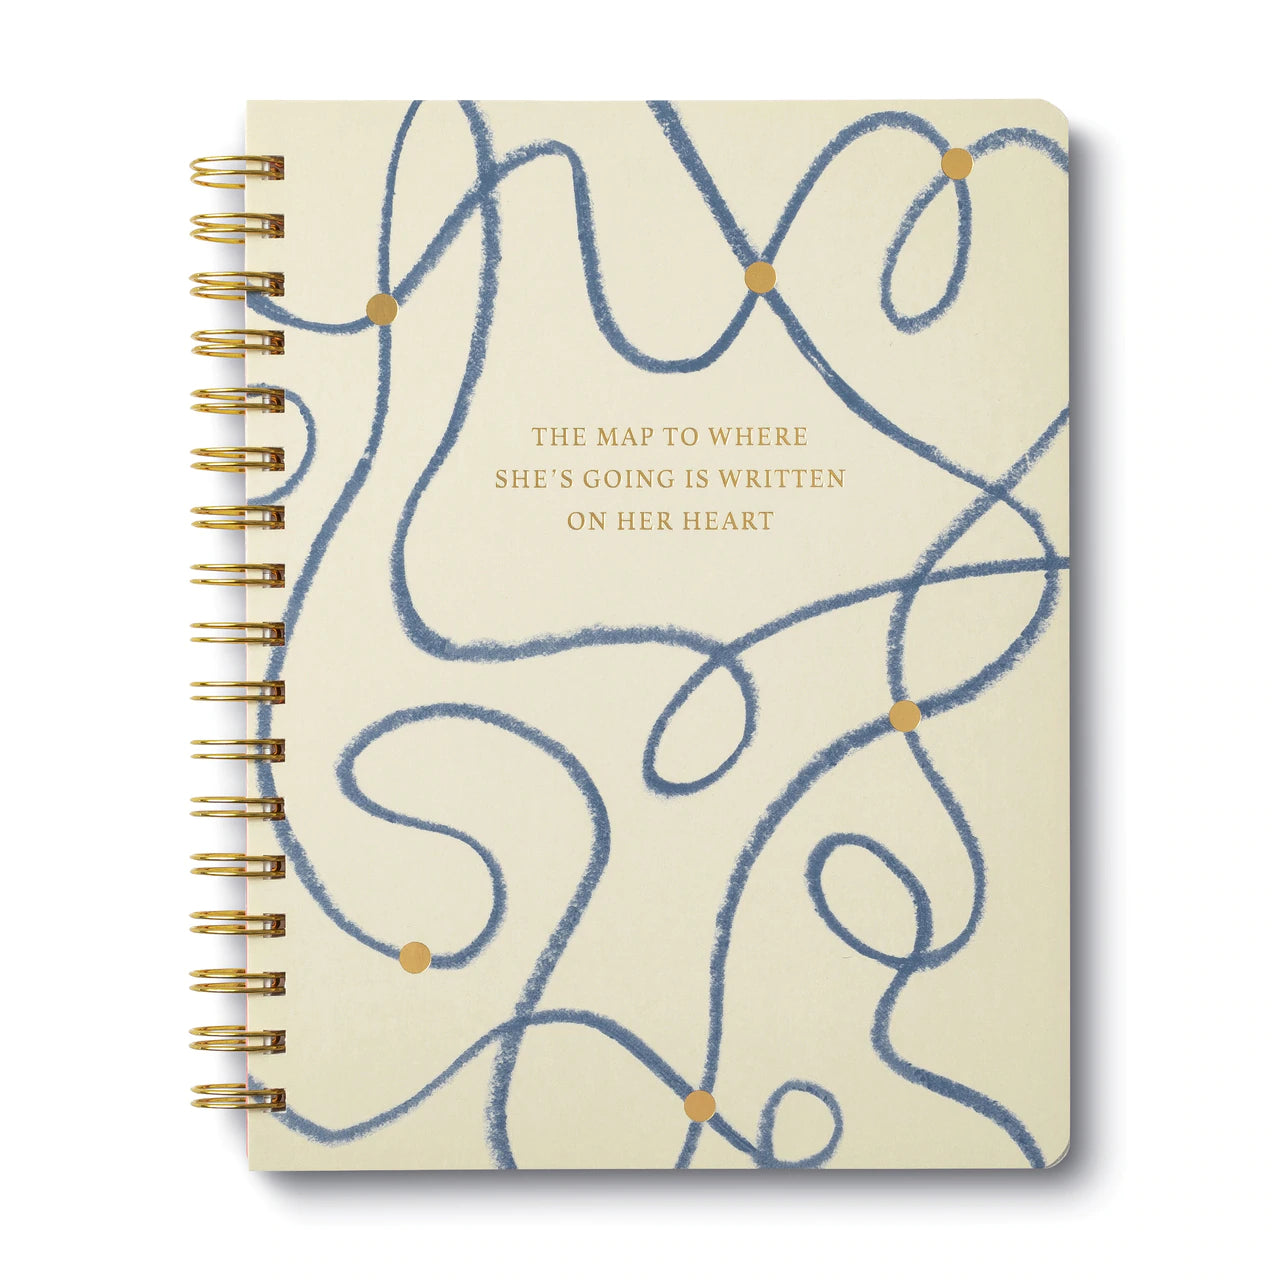 Notebook " THE MAP TO WHERE SHE’S GOING IS WRITTEN ON HER HEART"